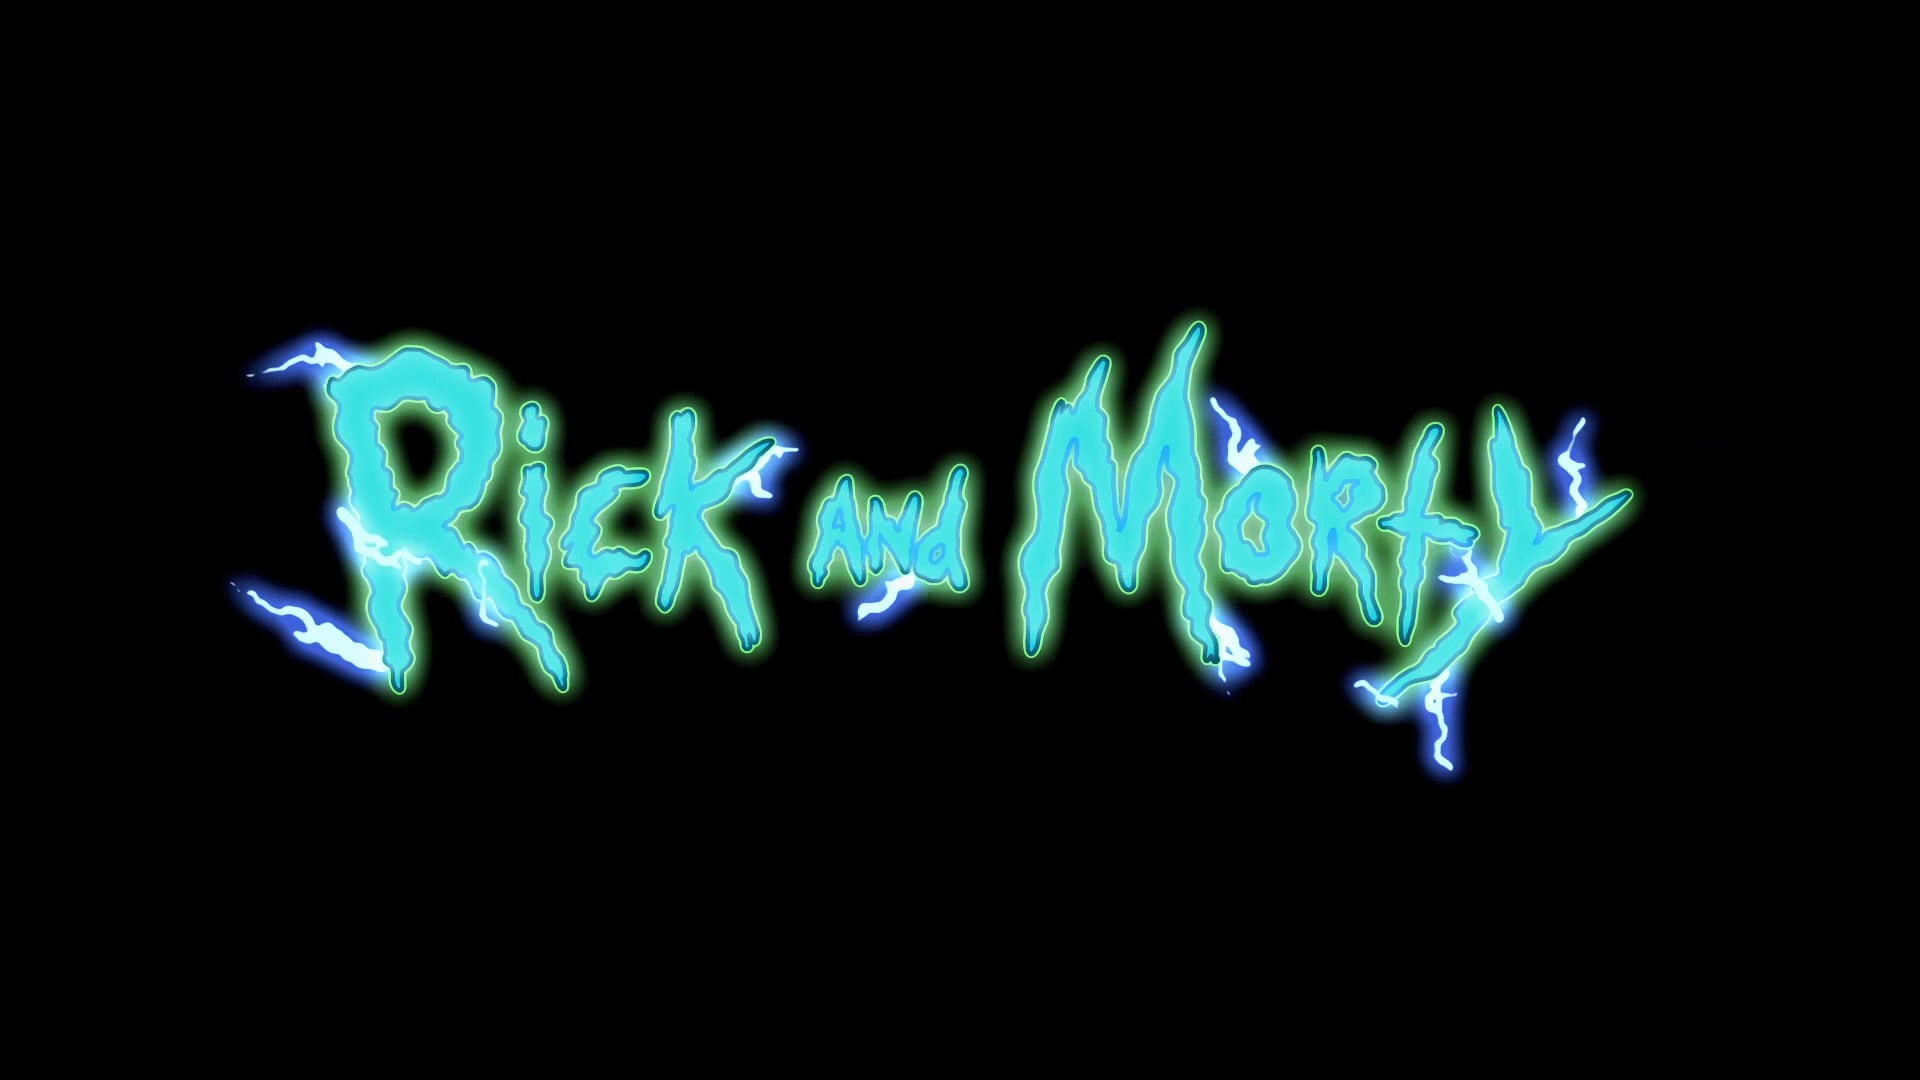 Wallpaper Rick and Morty Desktop with image resolution 1920x1080 pixel. You can use this wallpaper as background for your desktop Computer Screensavers, Android or iPhone smartphones